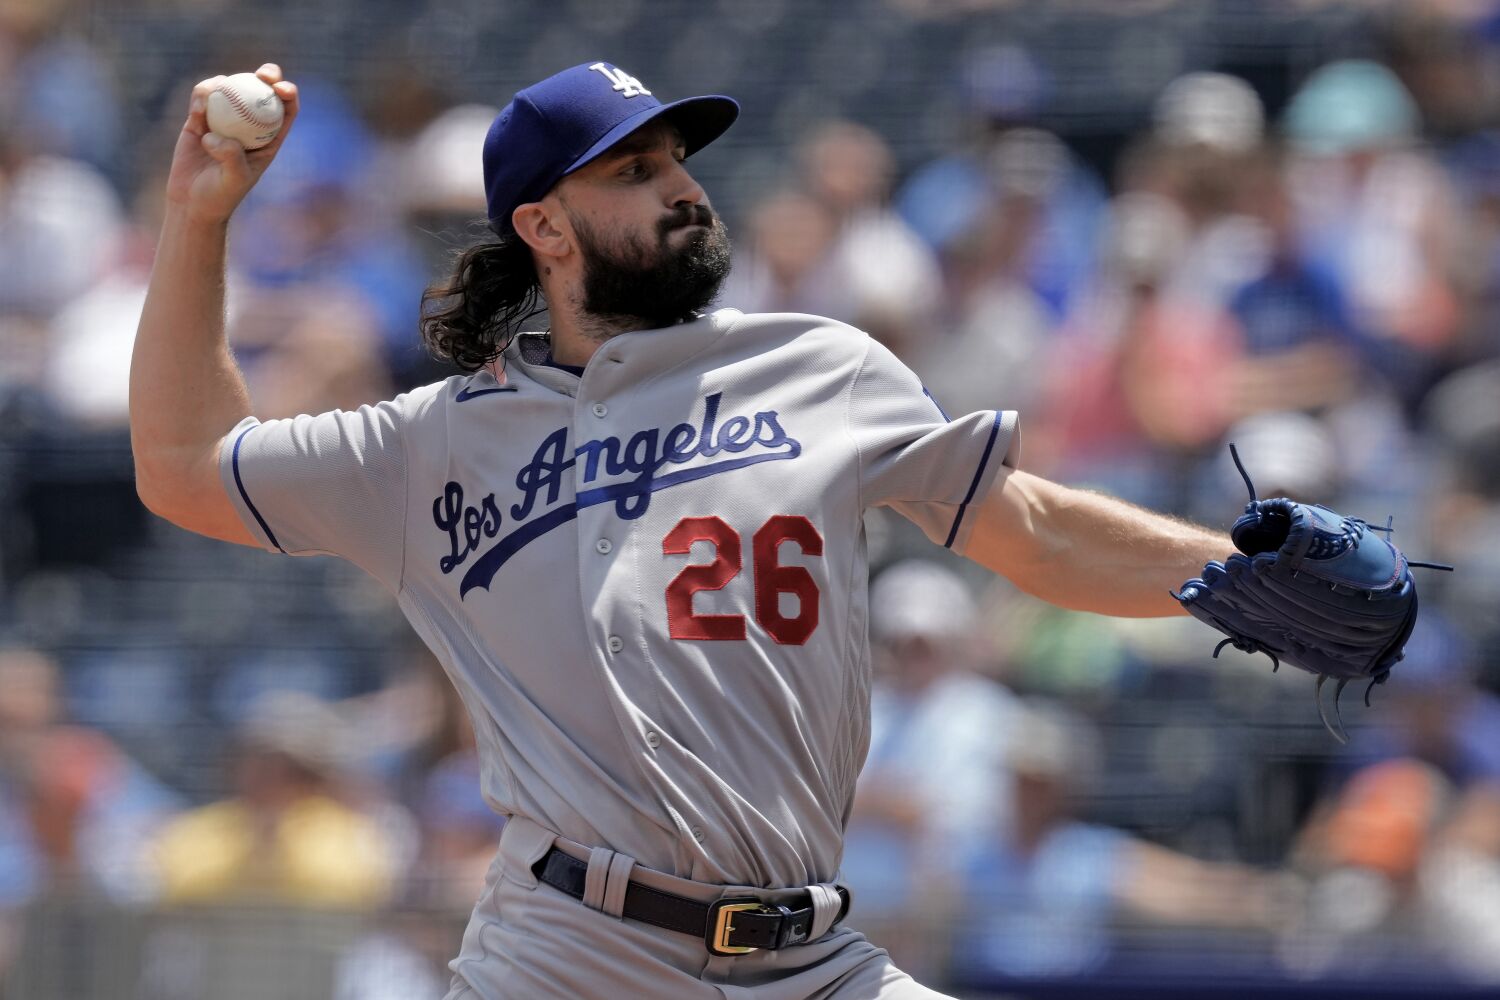 Tony Gonsolin struggles again and Dodgers lose series to Royals